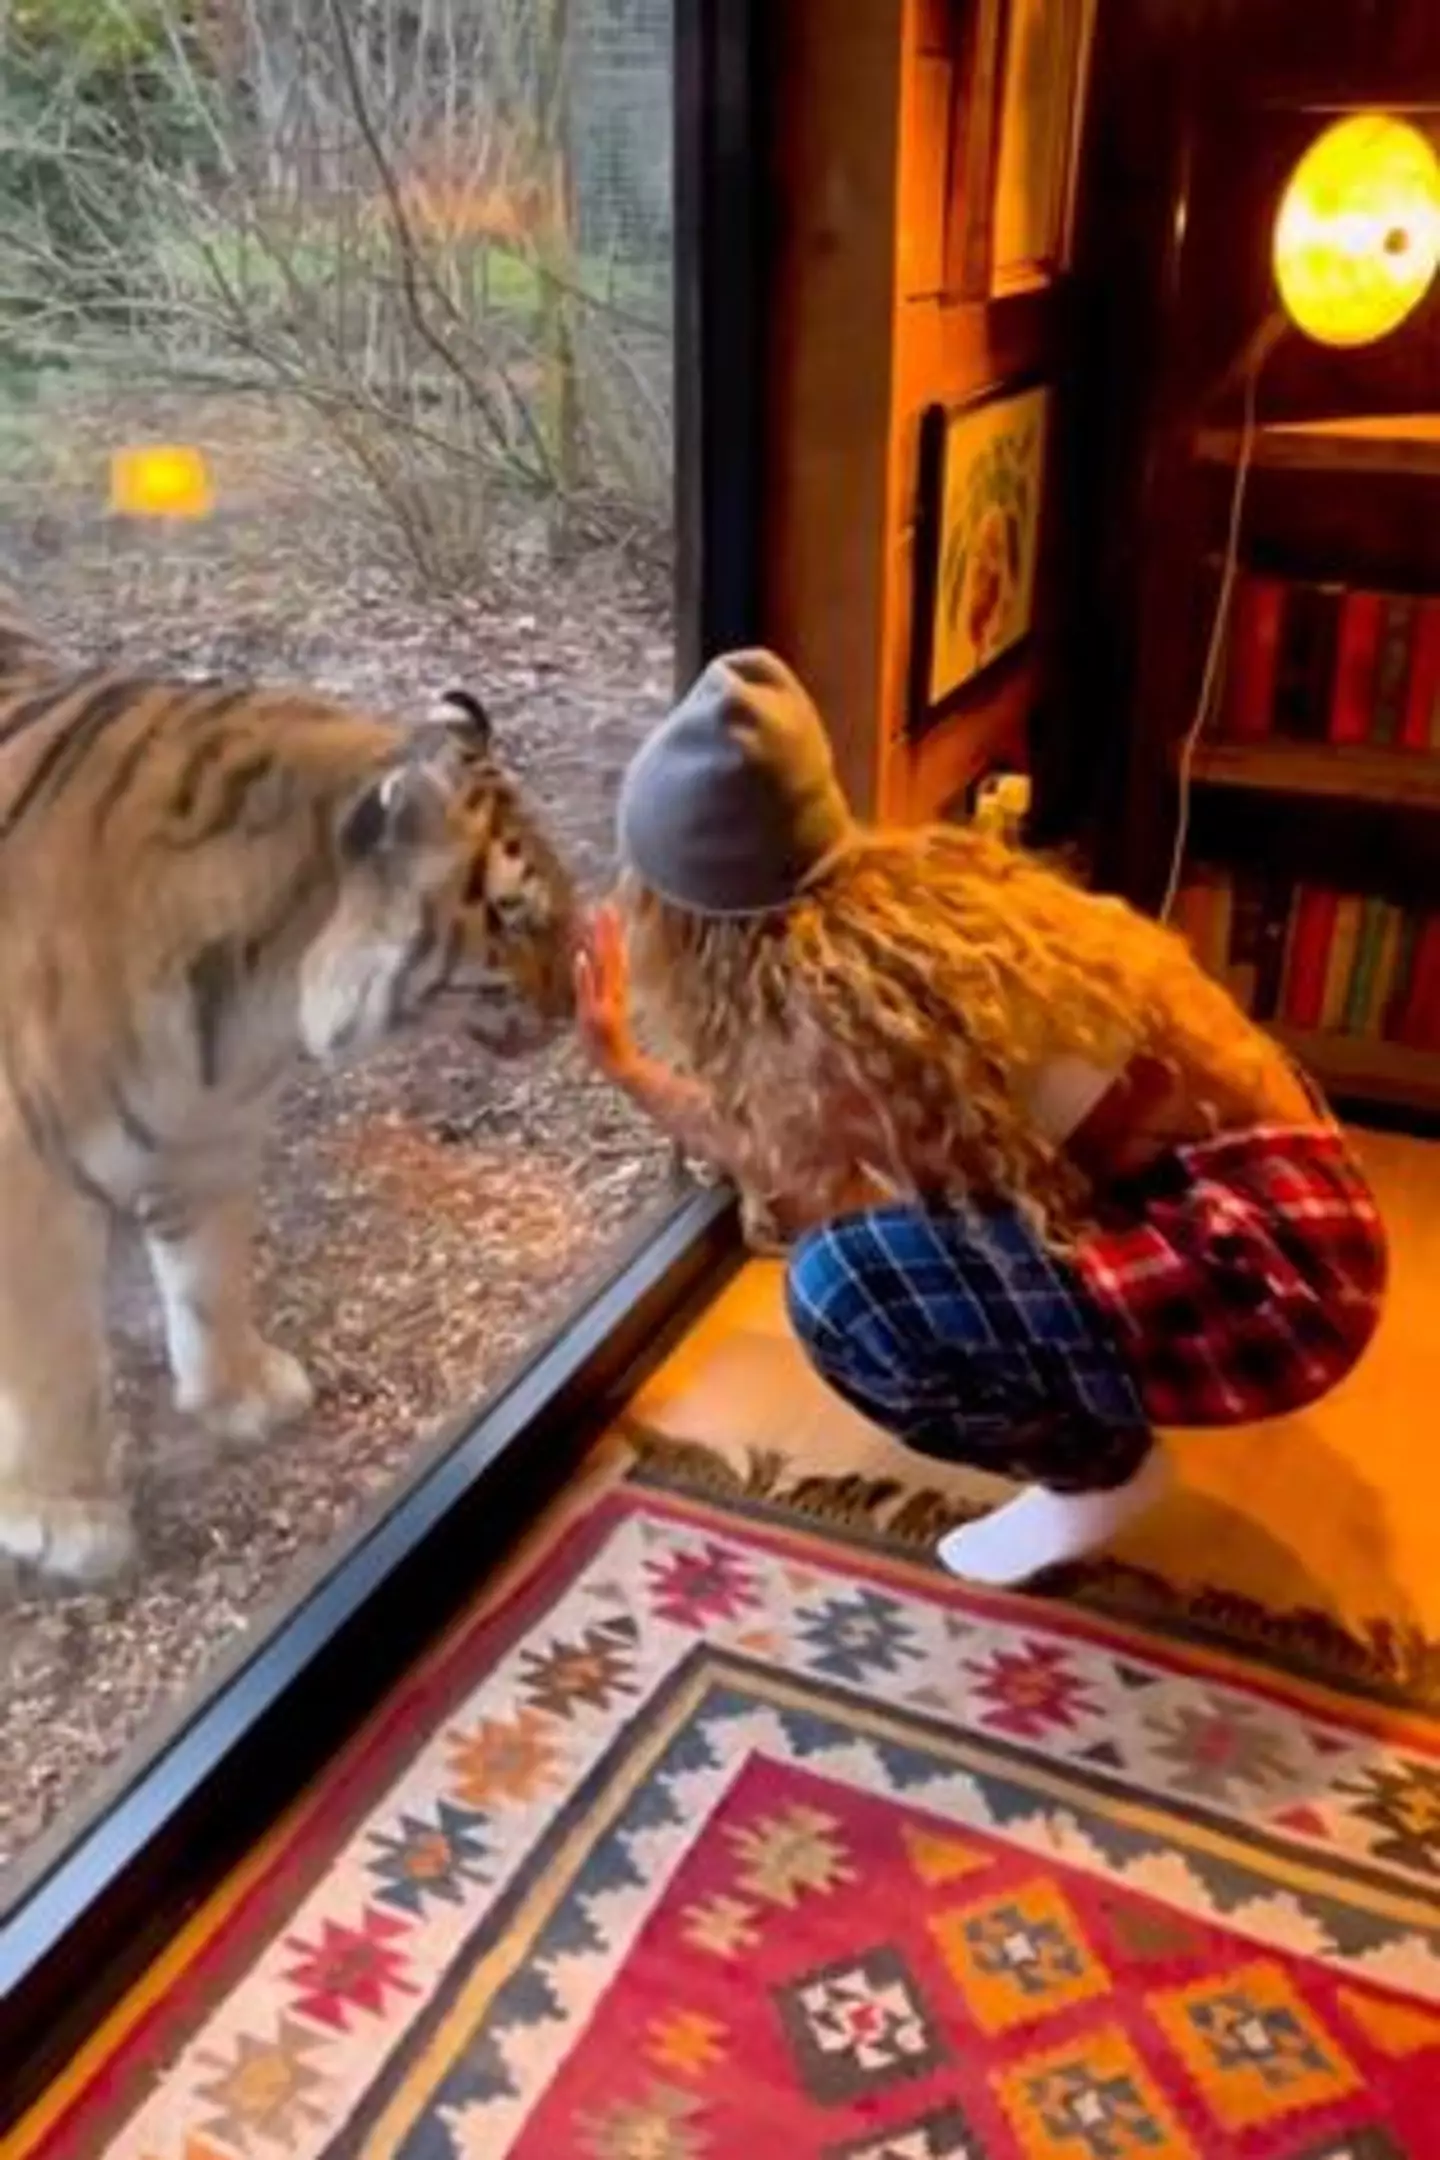 The former Little Mix bandmate had been staying at a luxury cabin which had views of the tiger's enclosure.